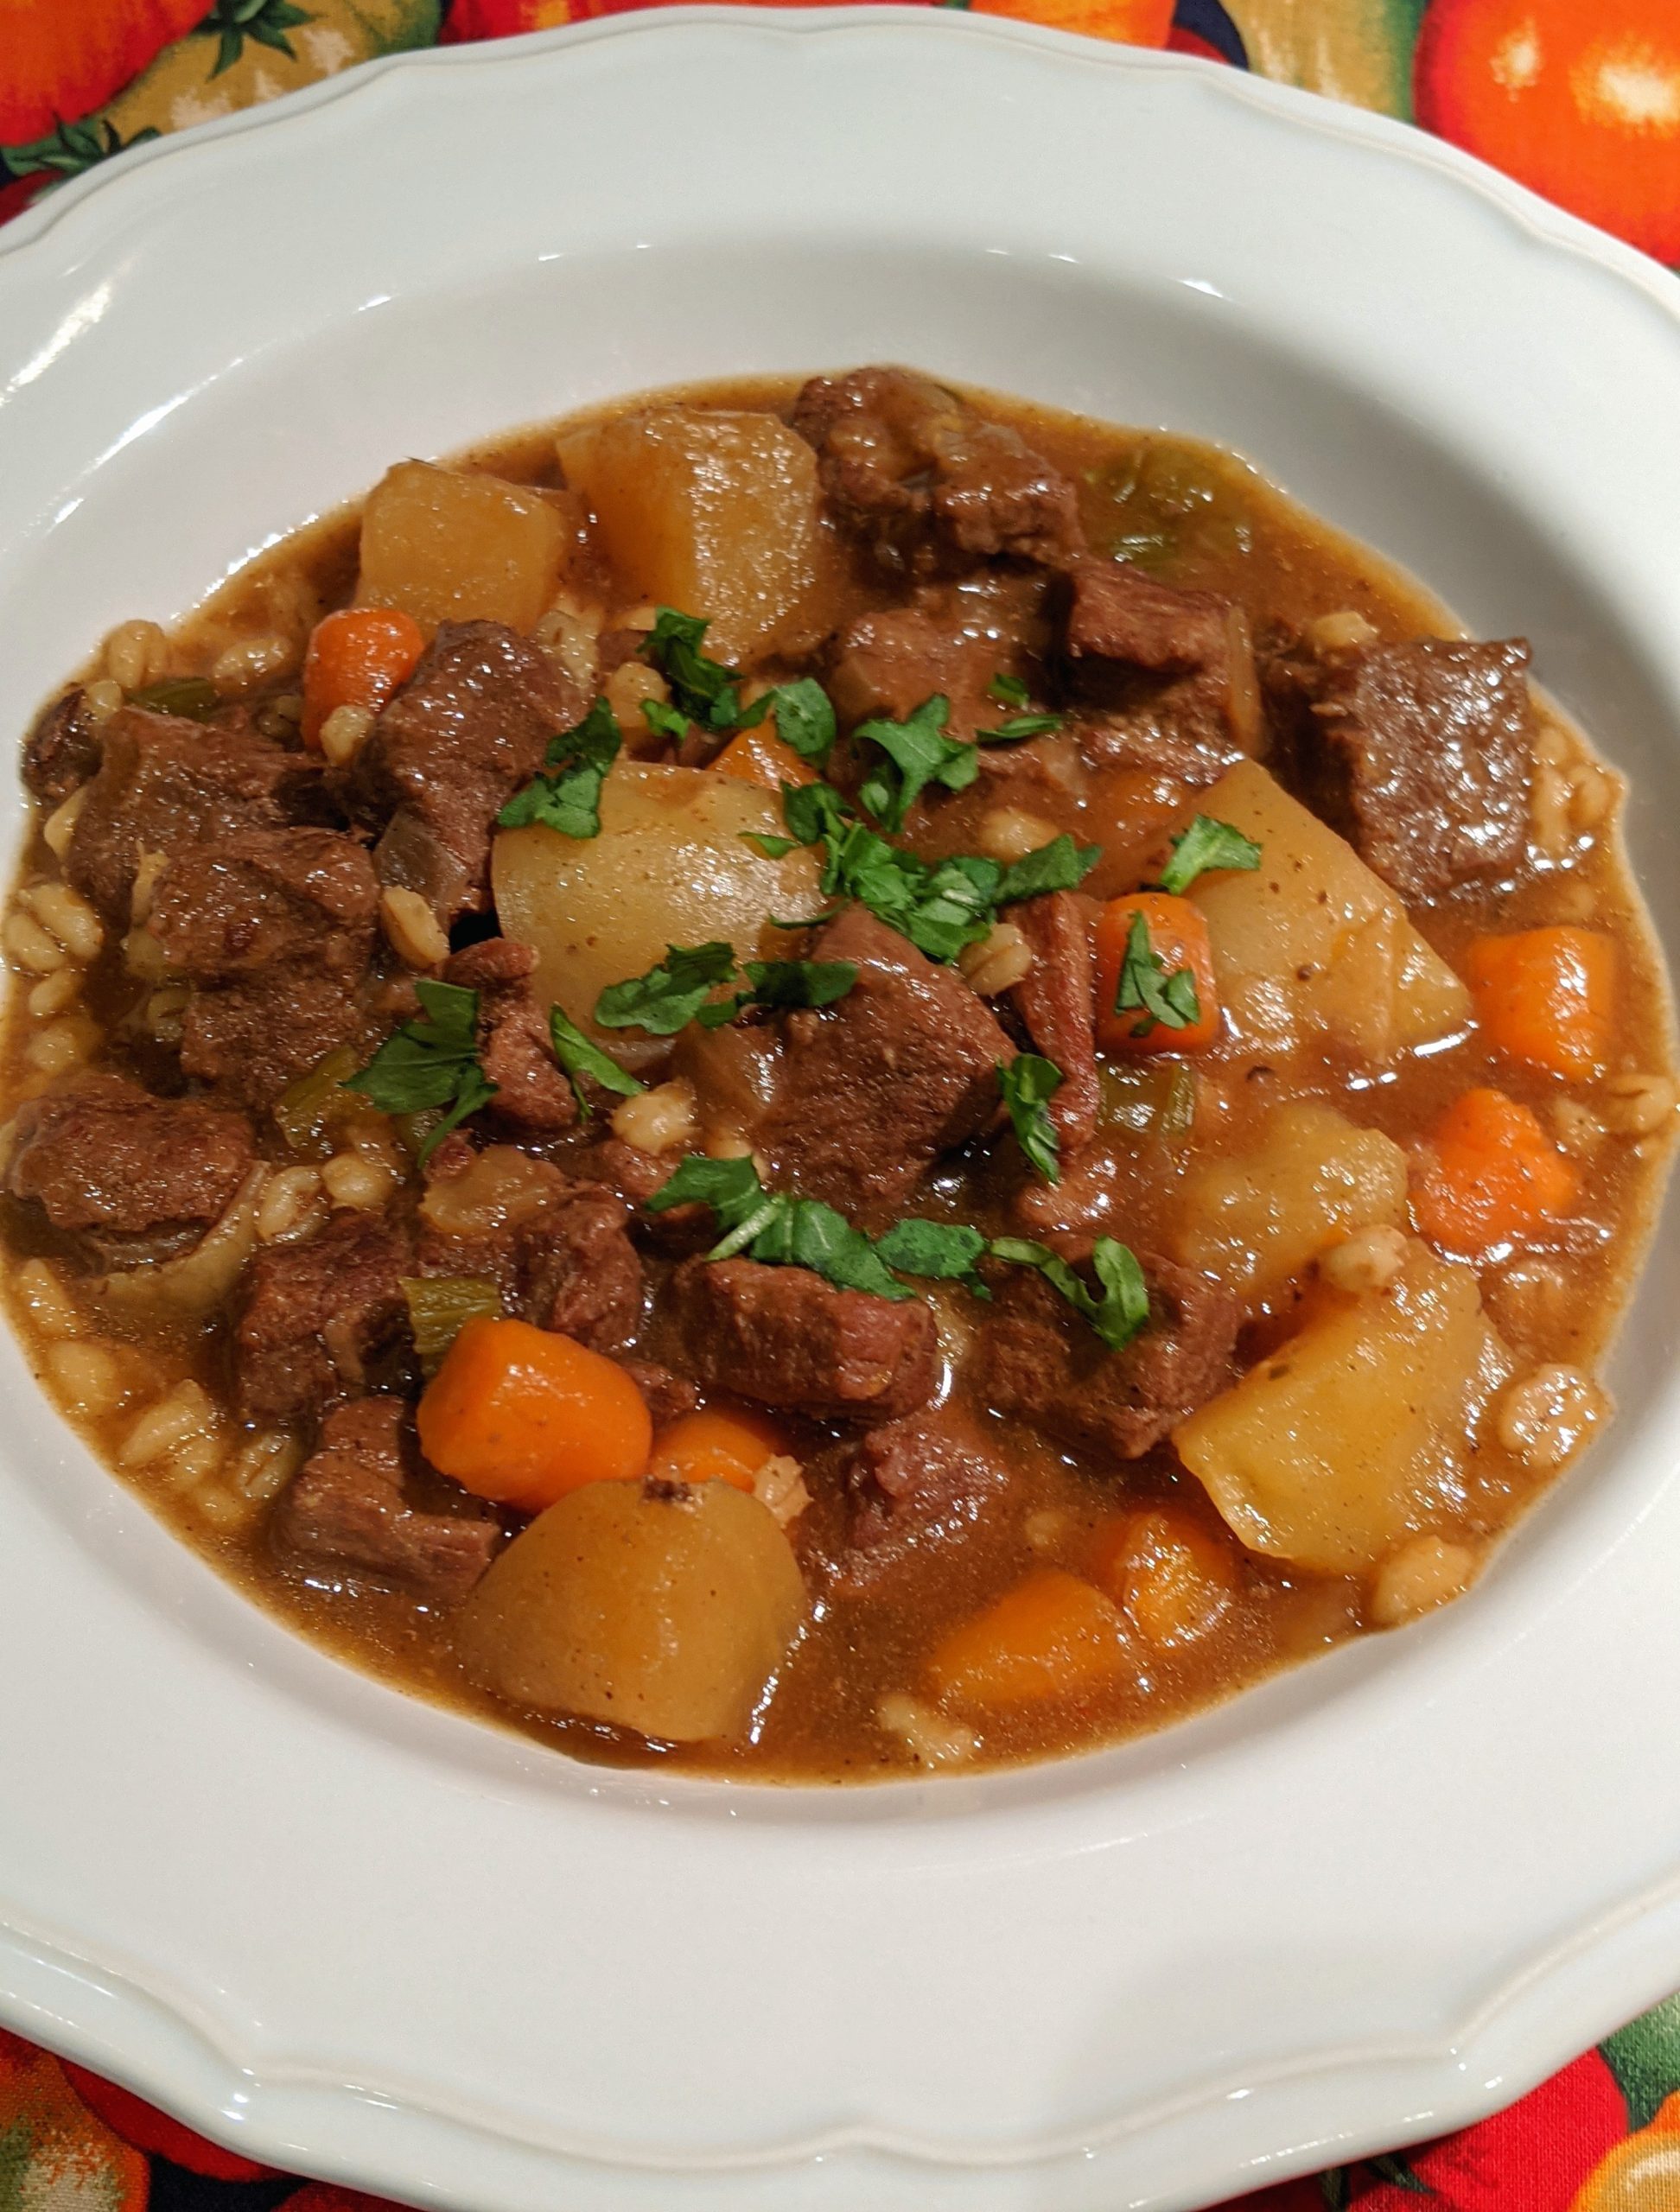 How to Make an Old-Fashioned Beef Stew Just Like Grandma